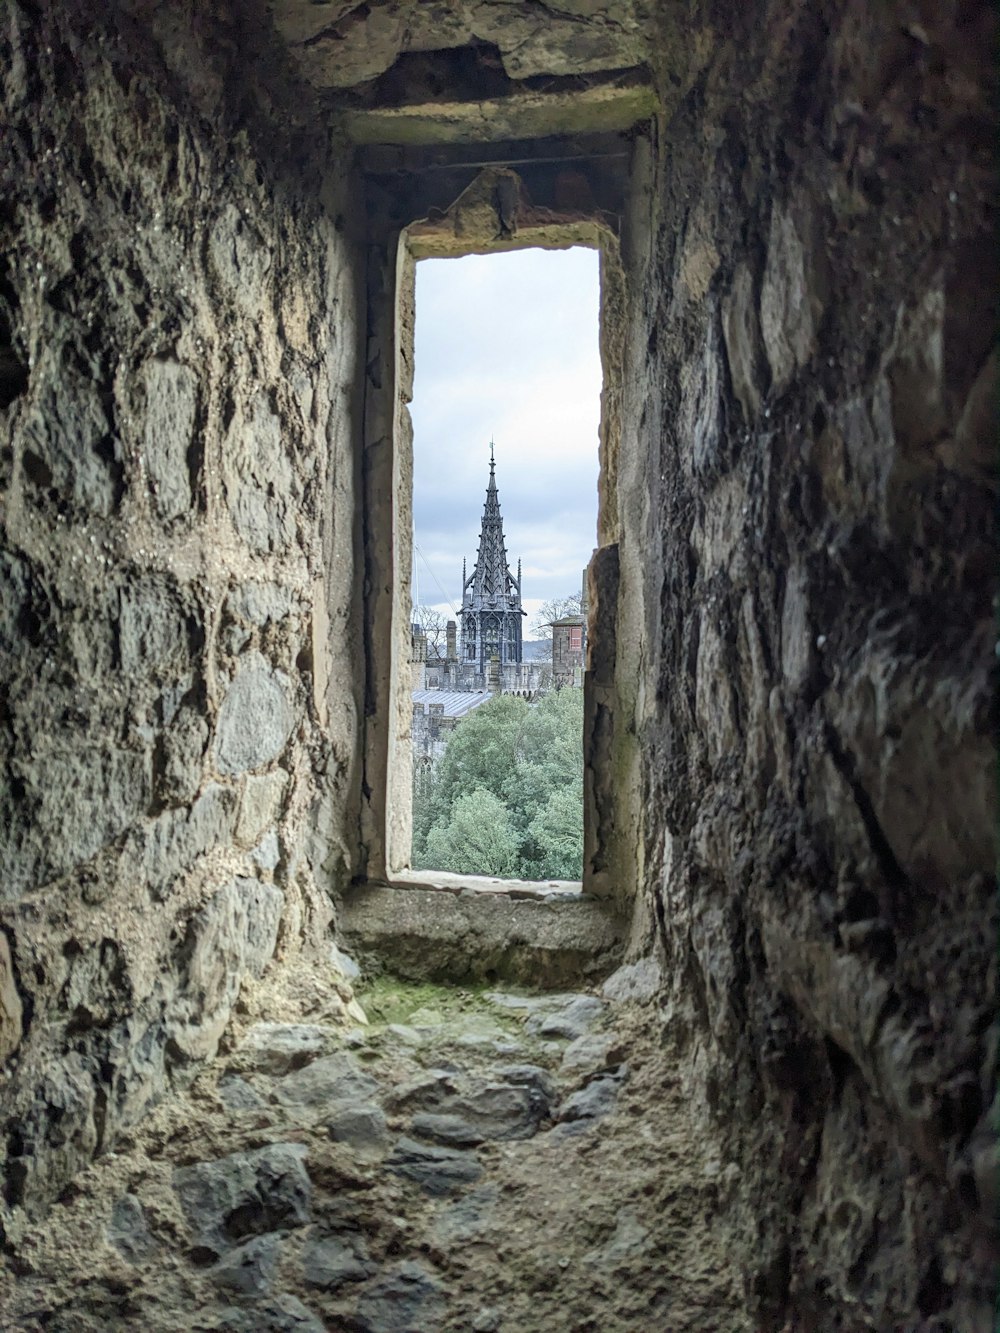 a window in a stone wall with a view of a city